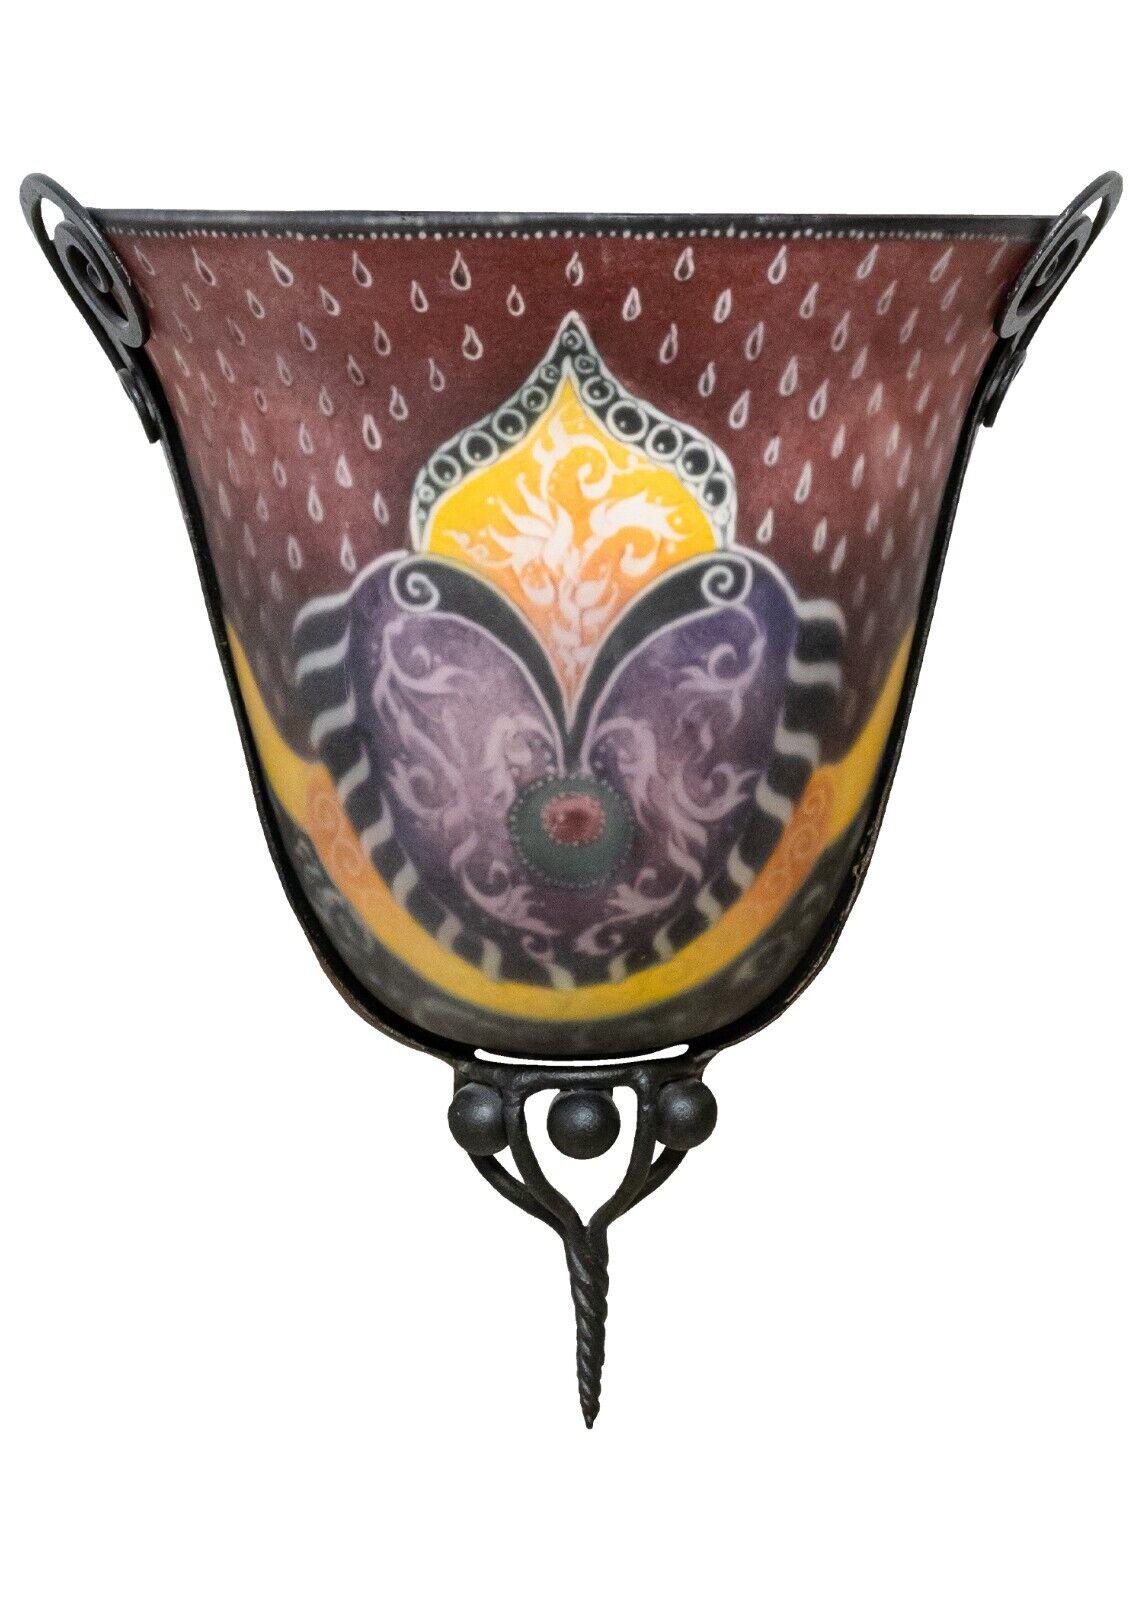 An Ulla Darni painted glass sconce. This beautifully crafted lighting fixture will catch the eye of anyone who passes. It consists of a two part construction; the painted glass and the metal frame. The glass has a frosted appearance that looks soft